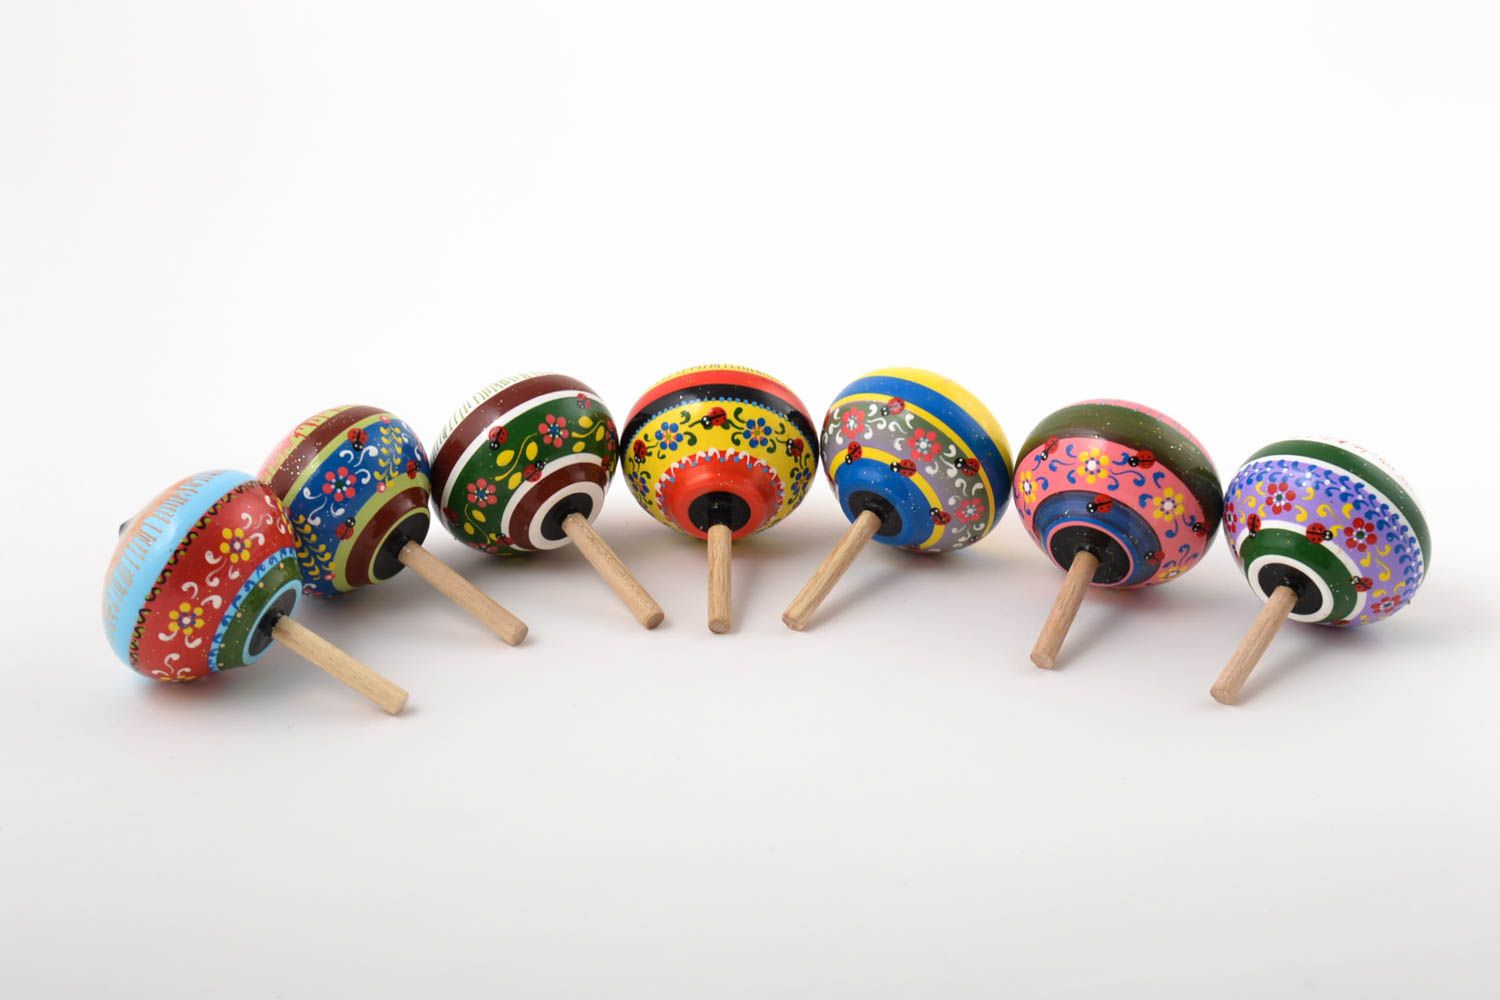 Handmade spinning tops wooden humming tops developing toys gifts for children photo 3